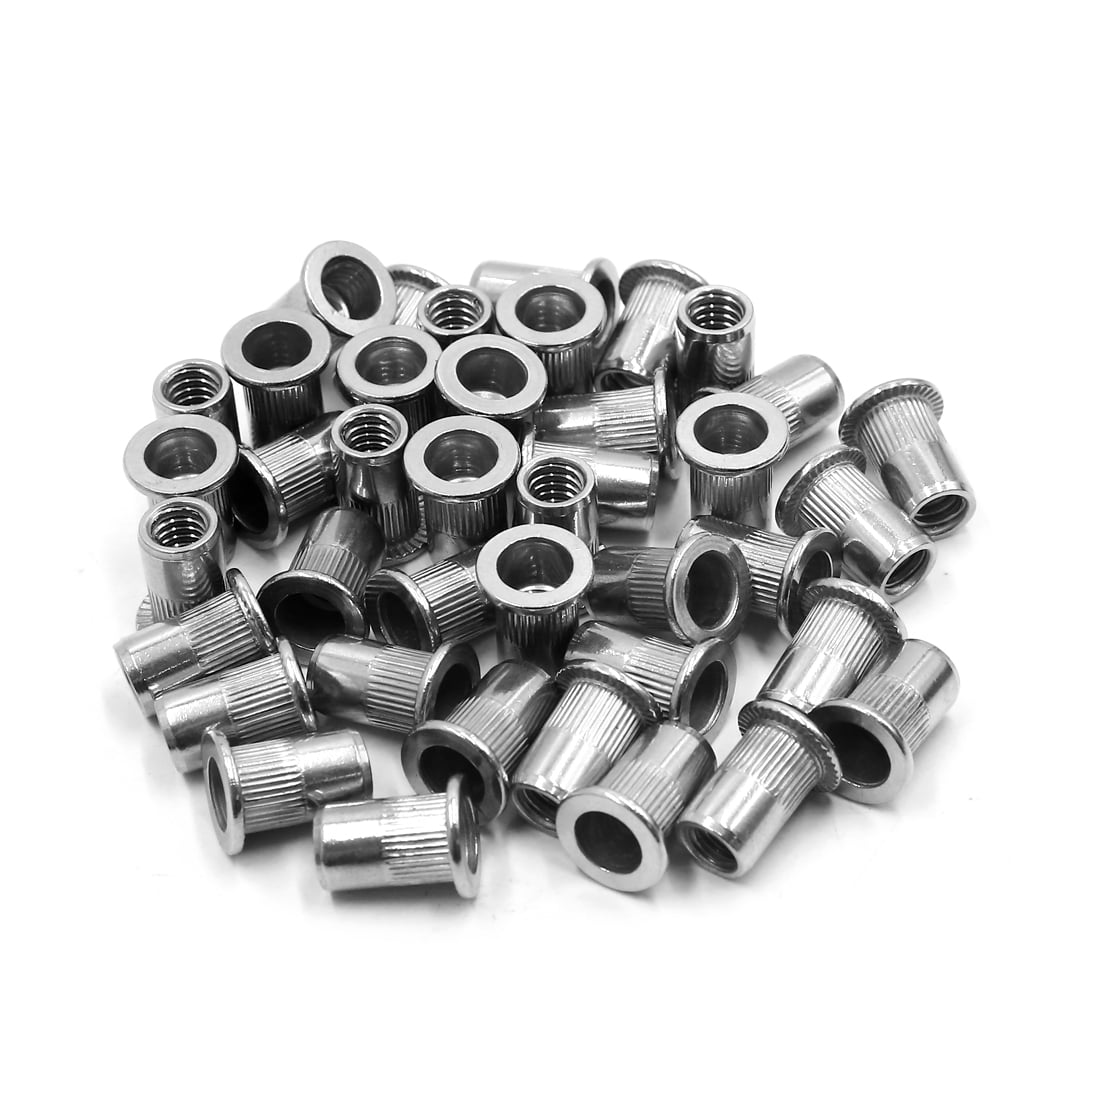 40pcs 1/4-20 Threaded Screw Inserts in Nut Insert Nutsert for Wood Furniture New 